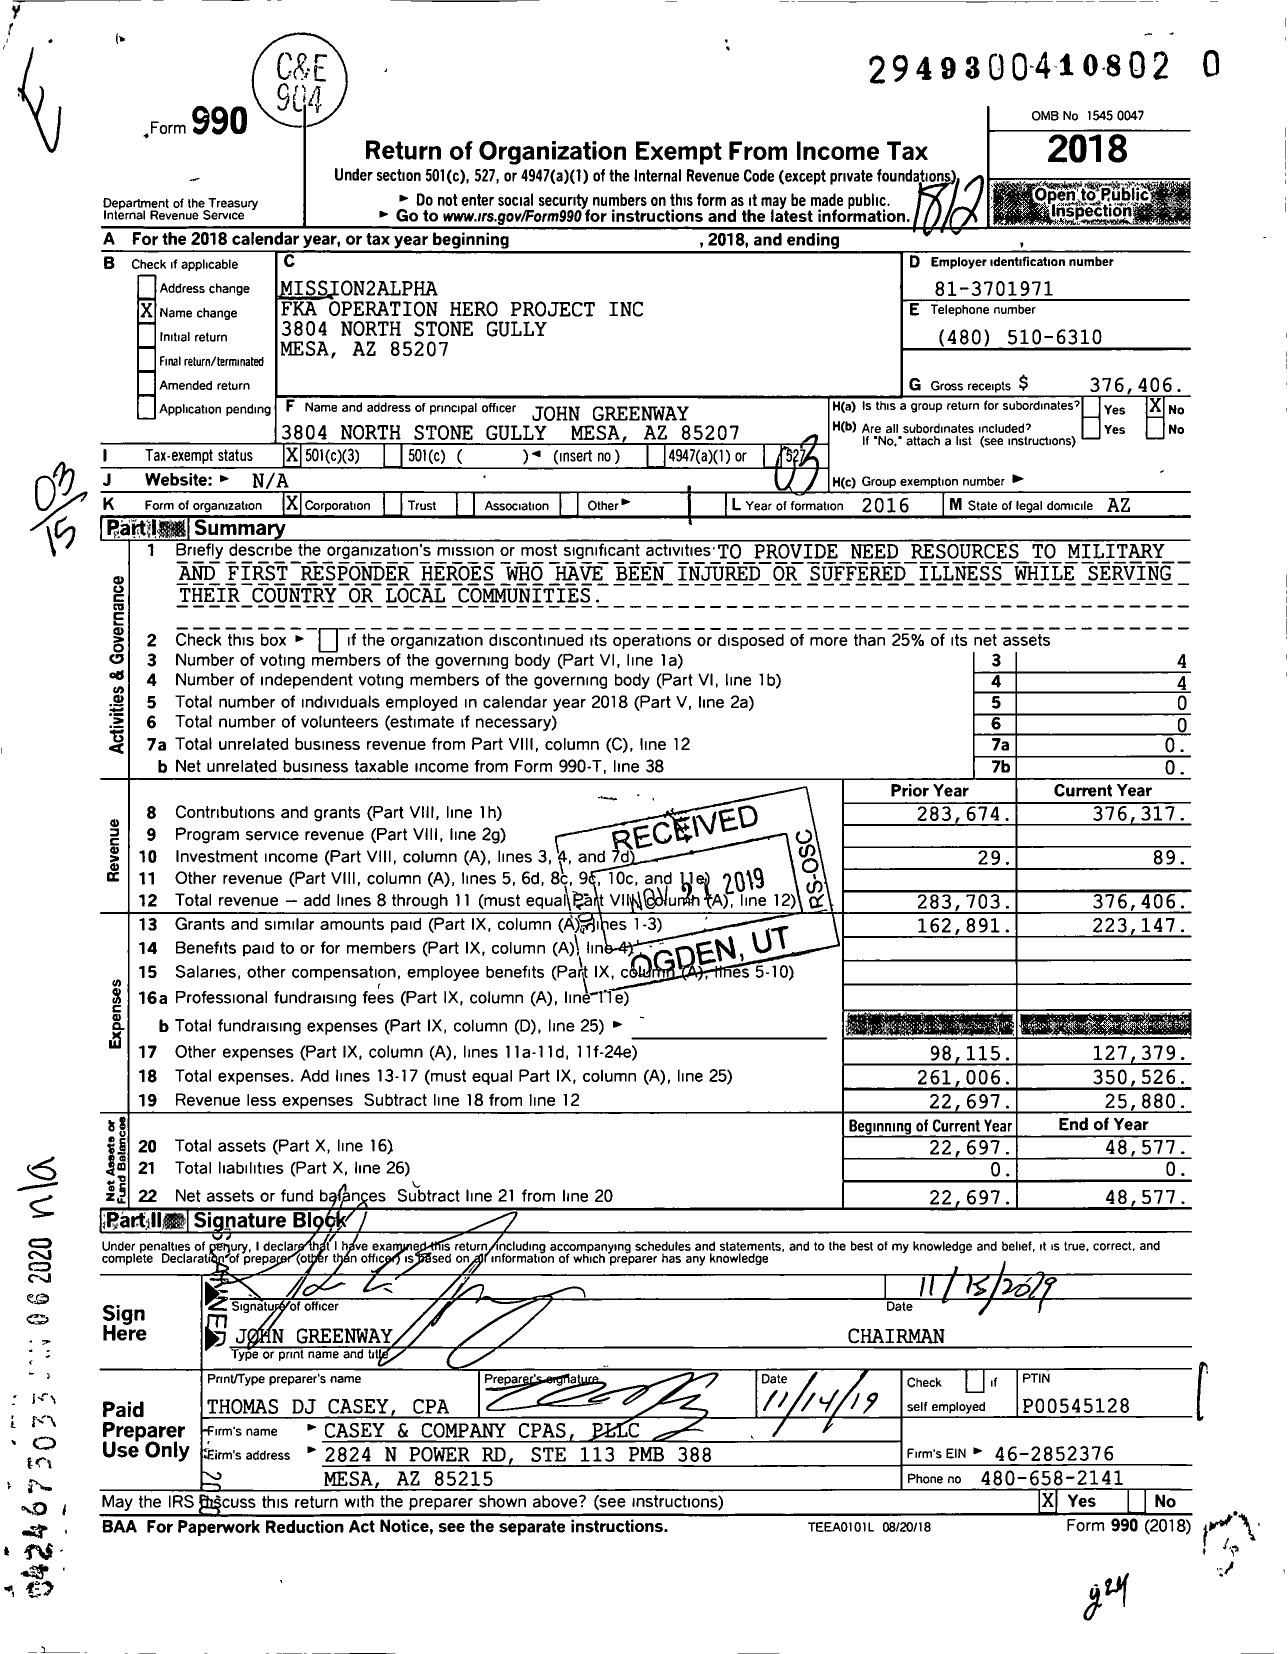 Image of first page of 2018 Form 990 for Mission2Alpha